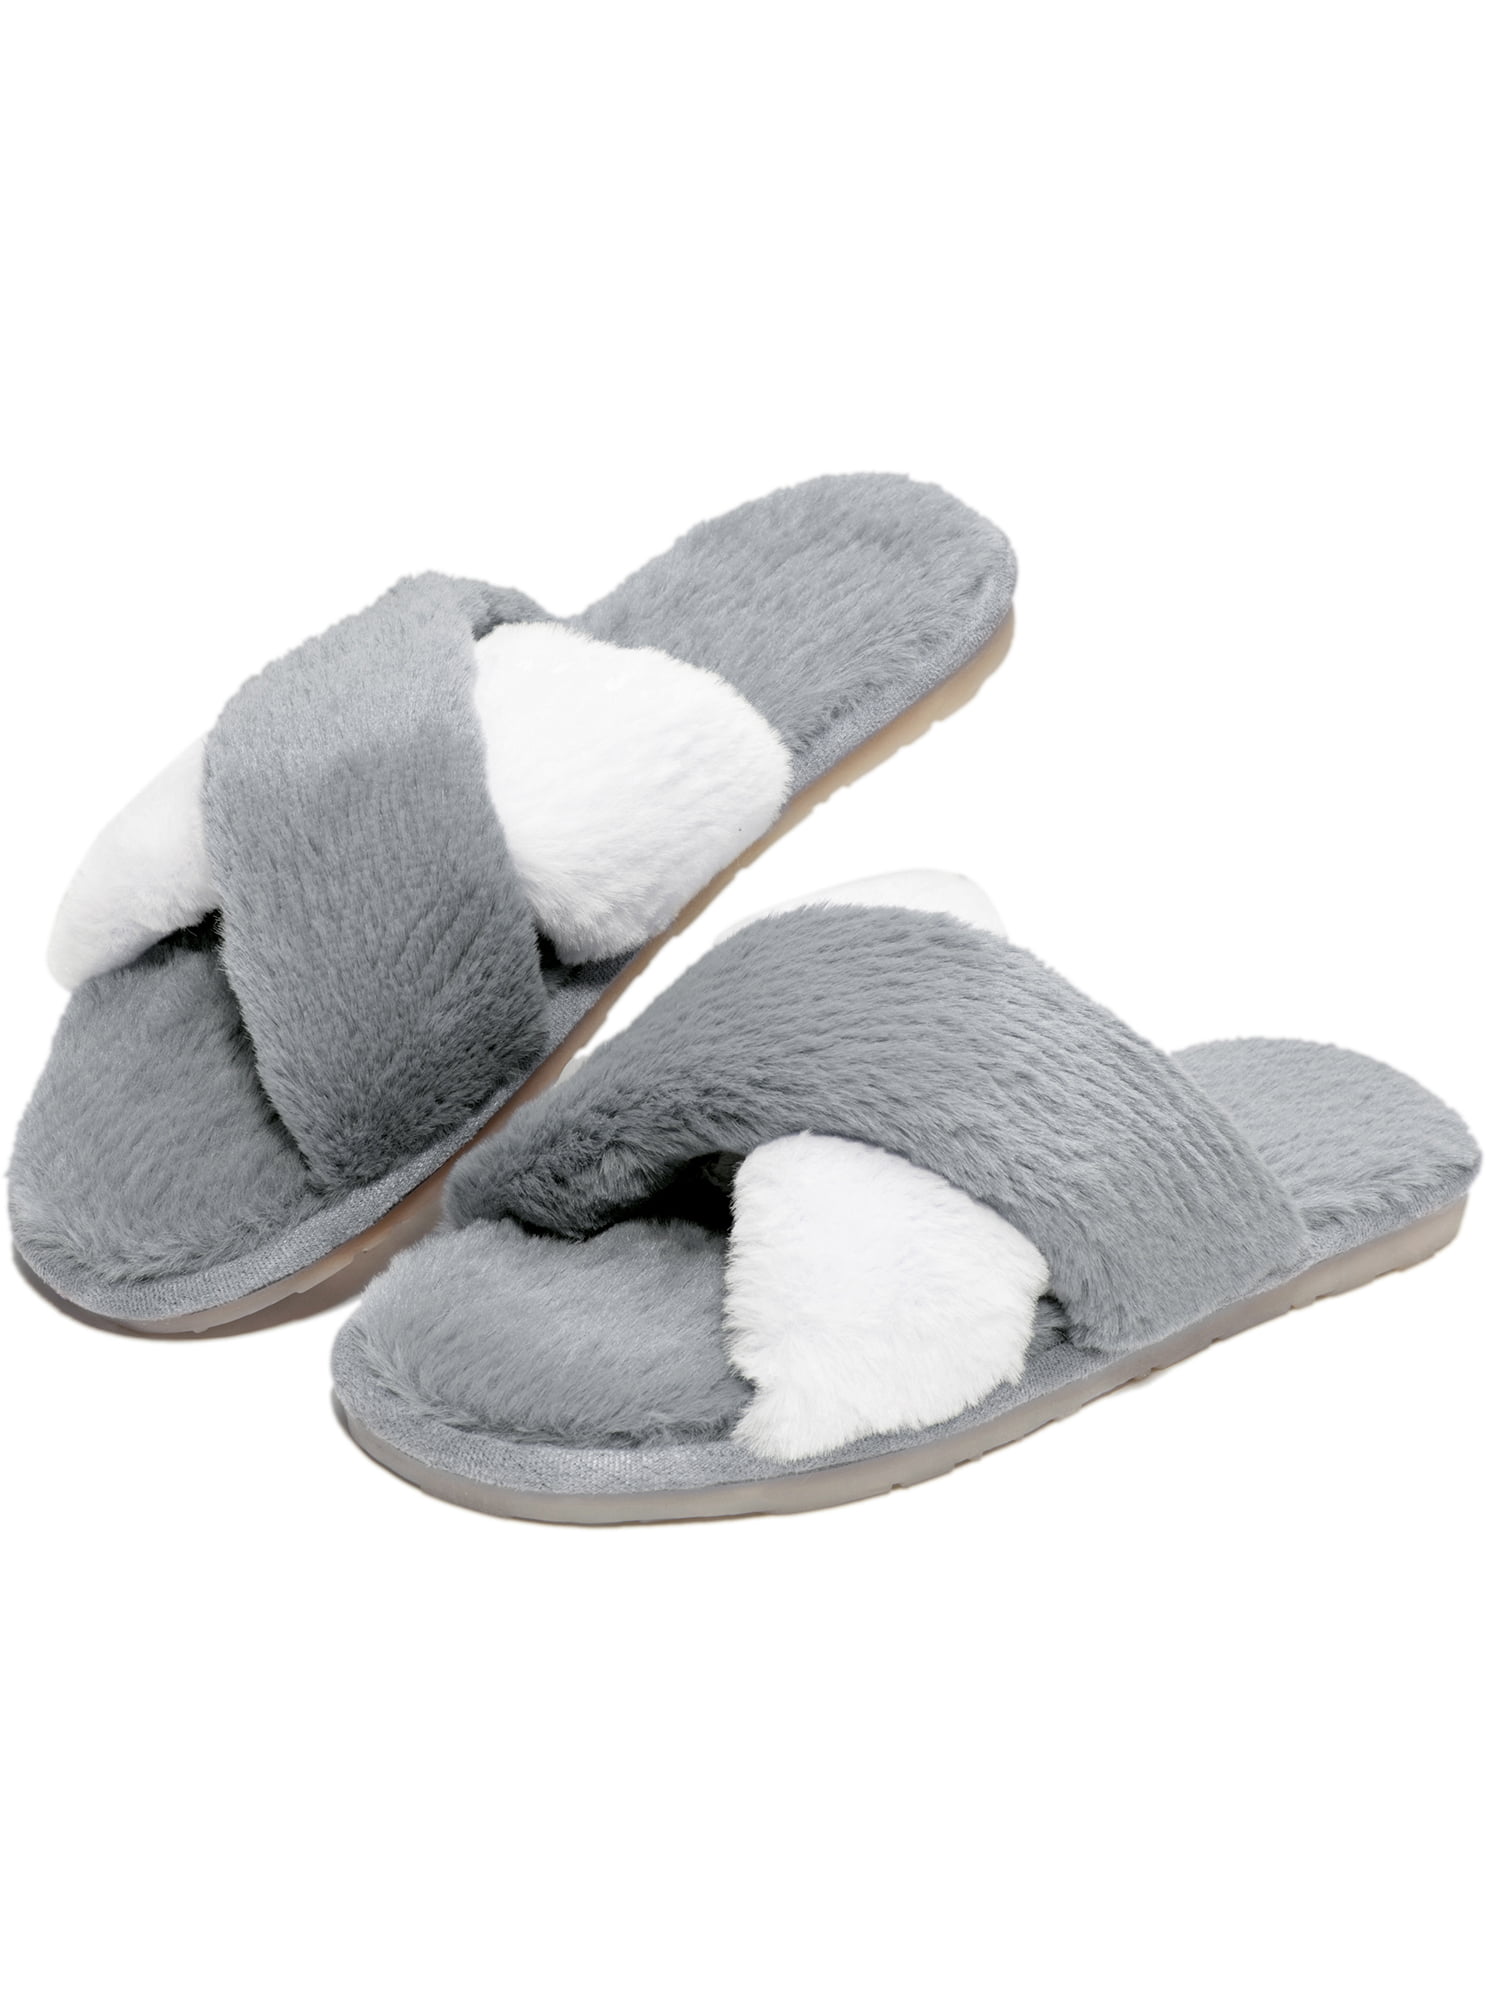 Caramella Bubble Womens Slippers Memory Foam Fluffy Fur Warm Soft Indoor Outdoor House Shoes 